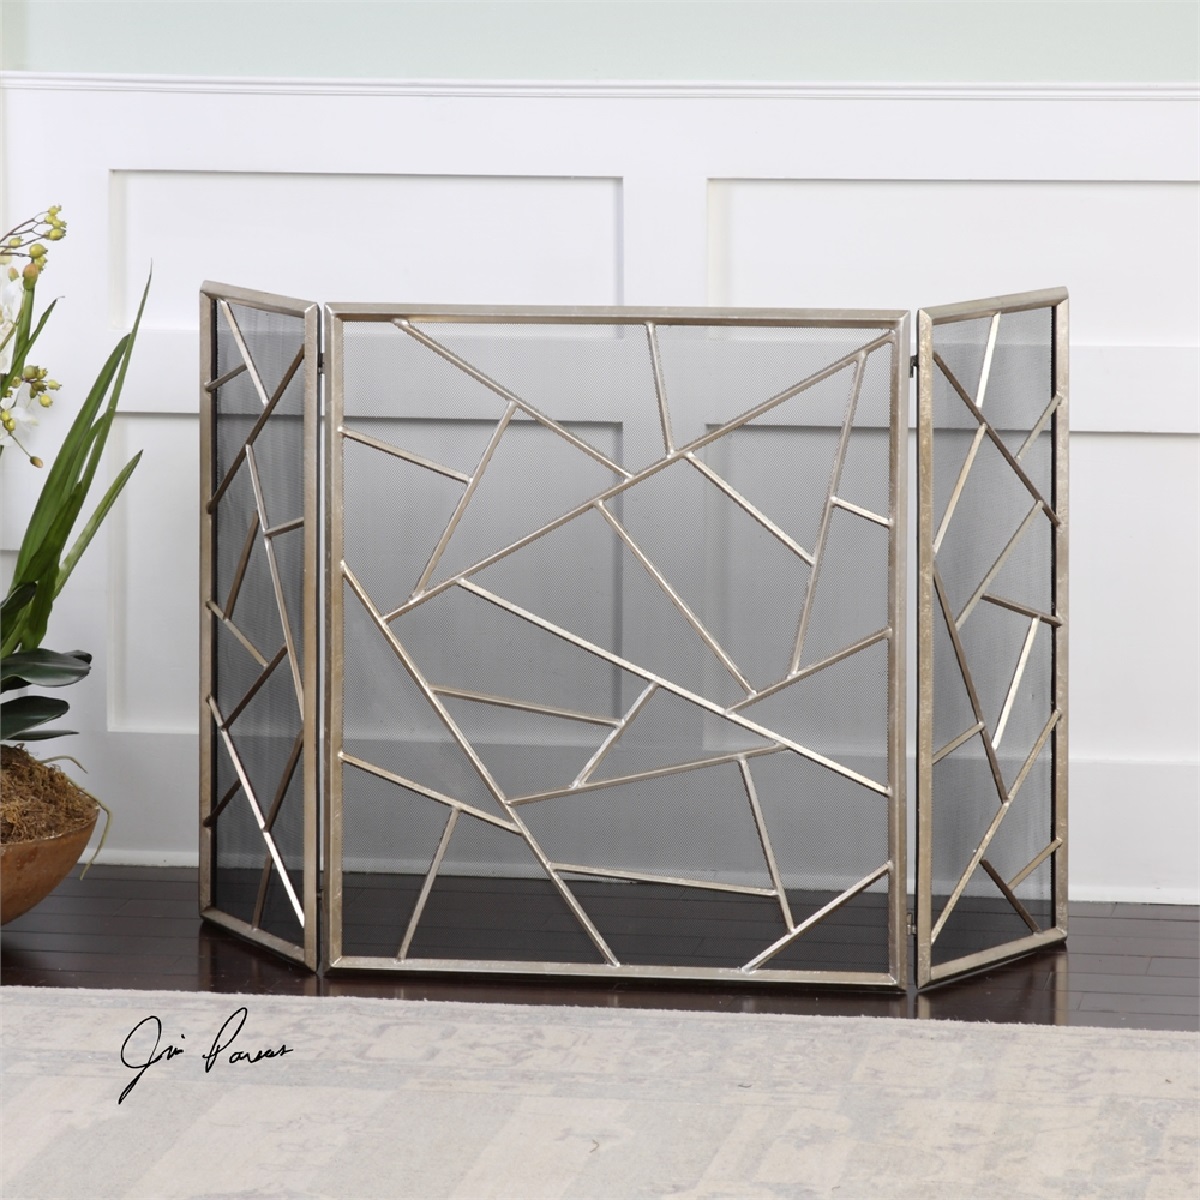 Diva At Home 4.25' Silver Modern Decorative Leaf Abstract-Themed Fireplace Screen